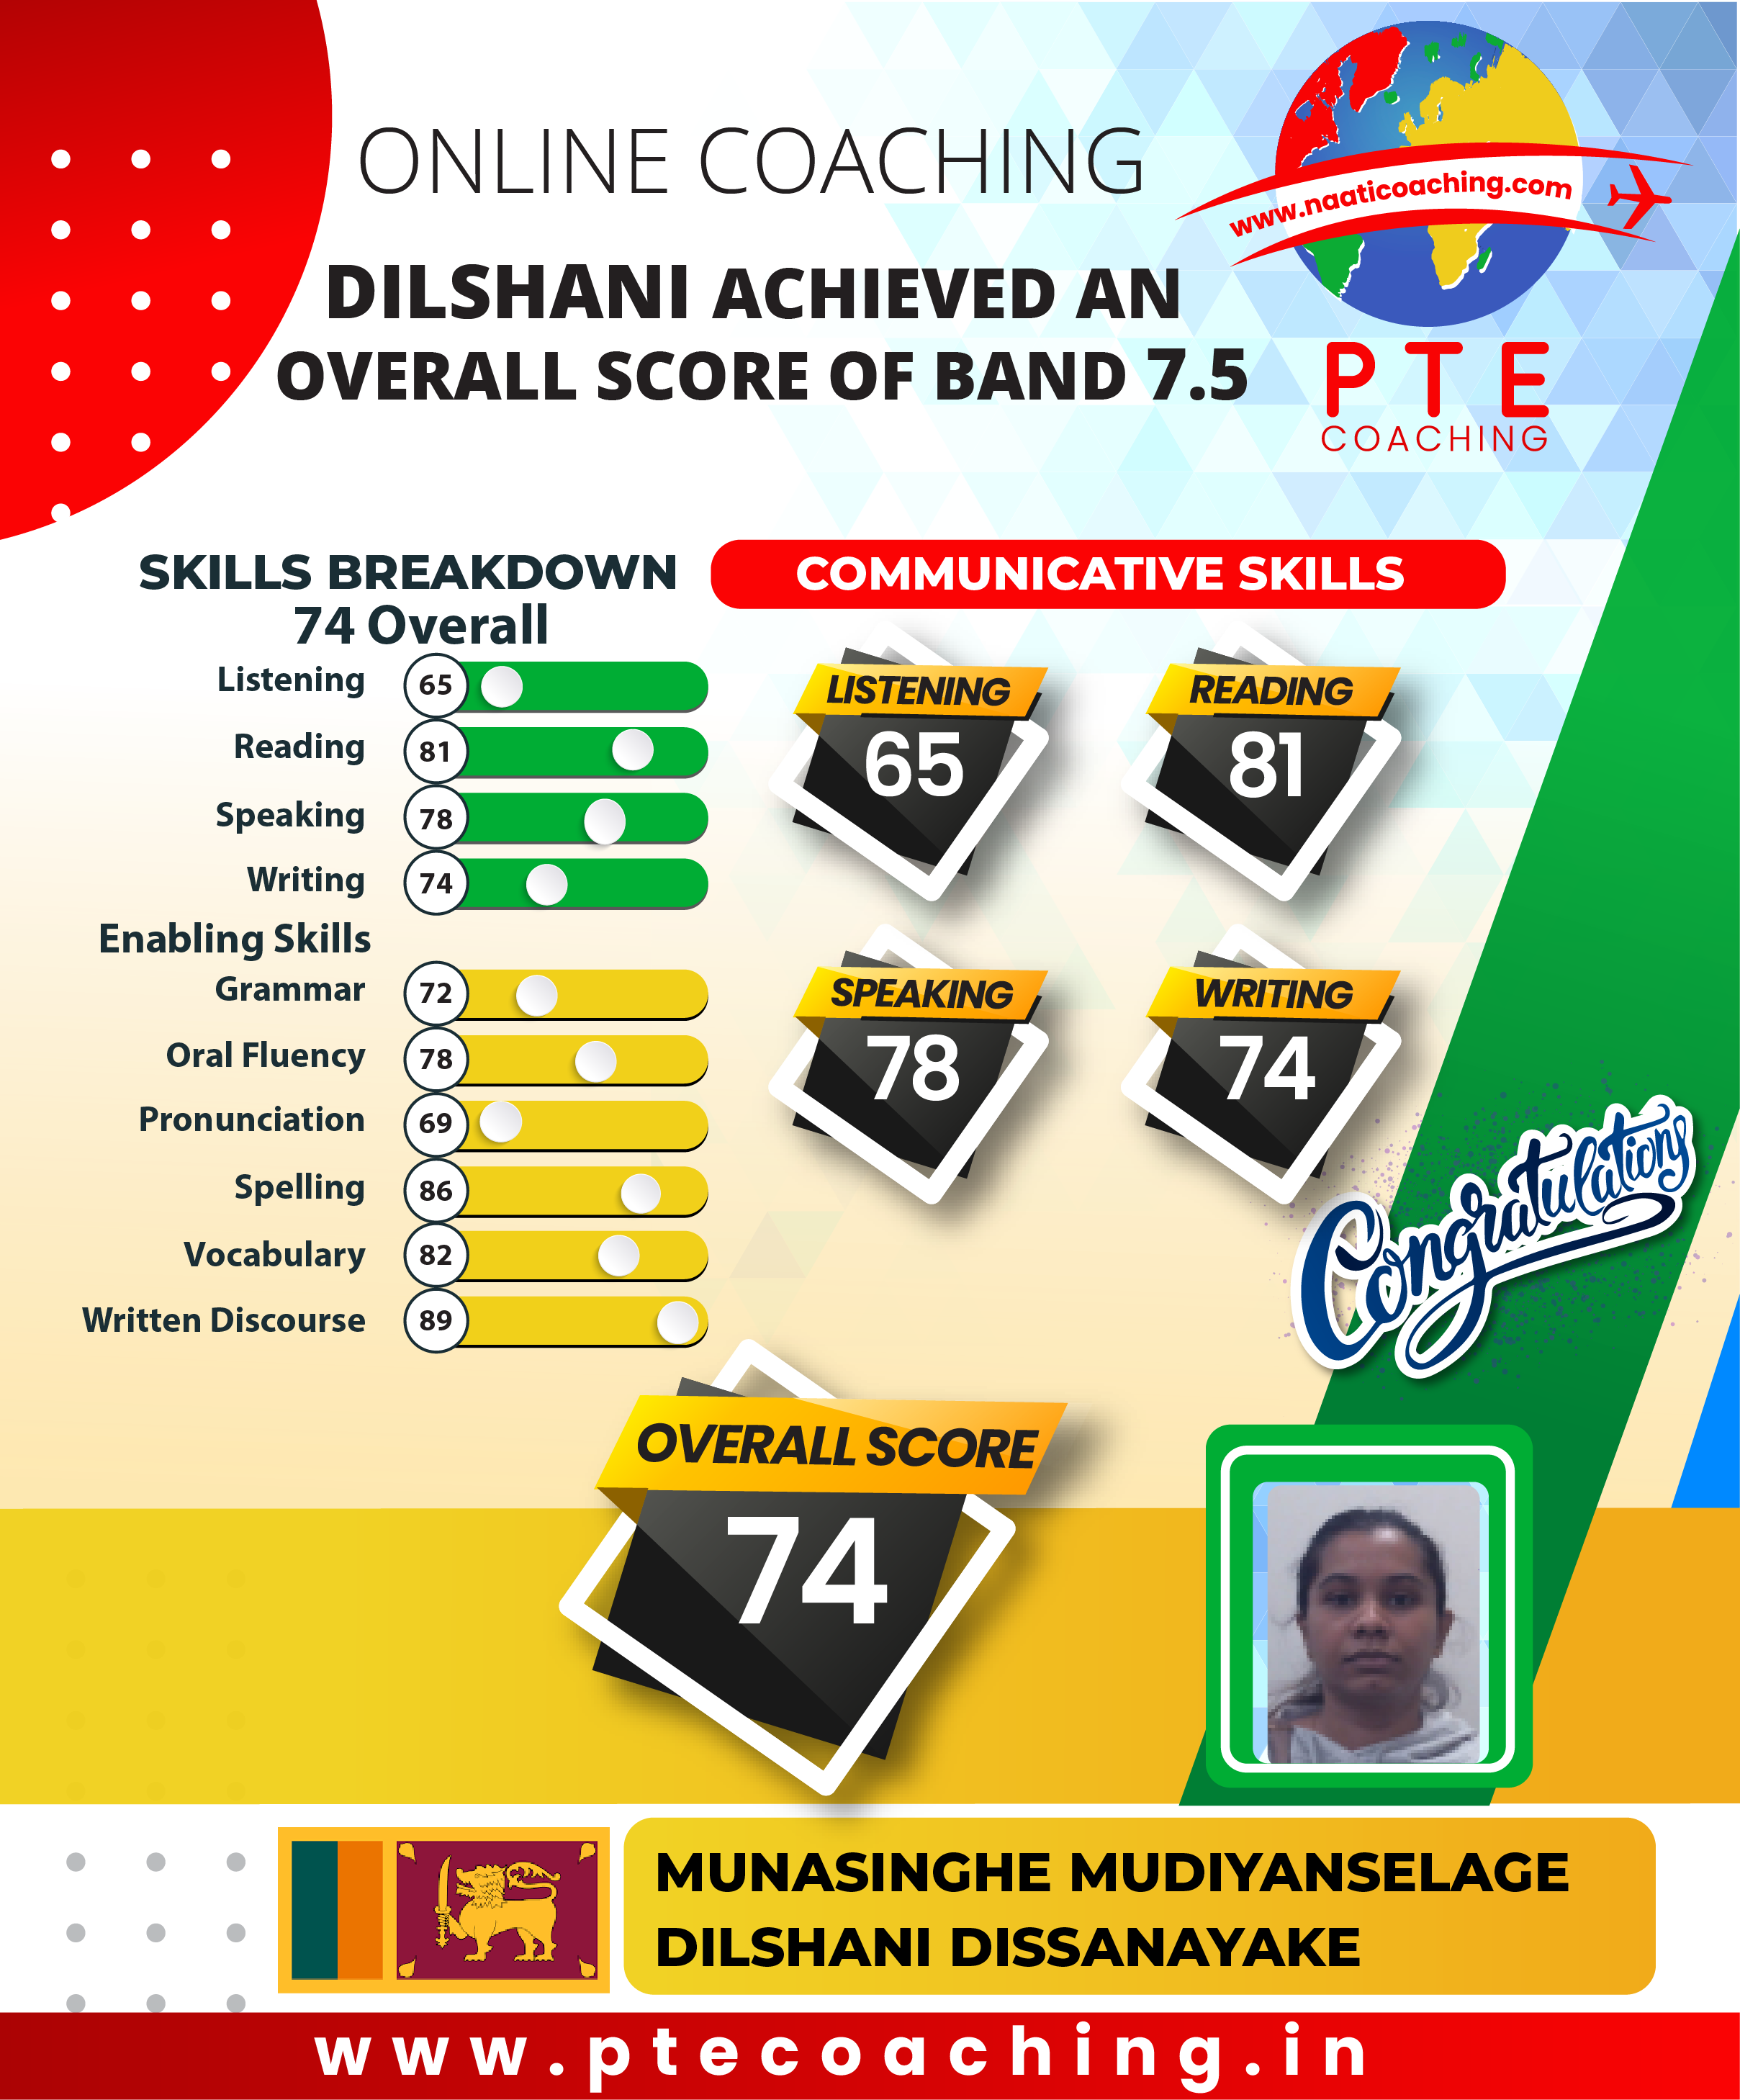 PTE Coaching Scorecard - Dilshani achieved an overall score of band 7.5